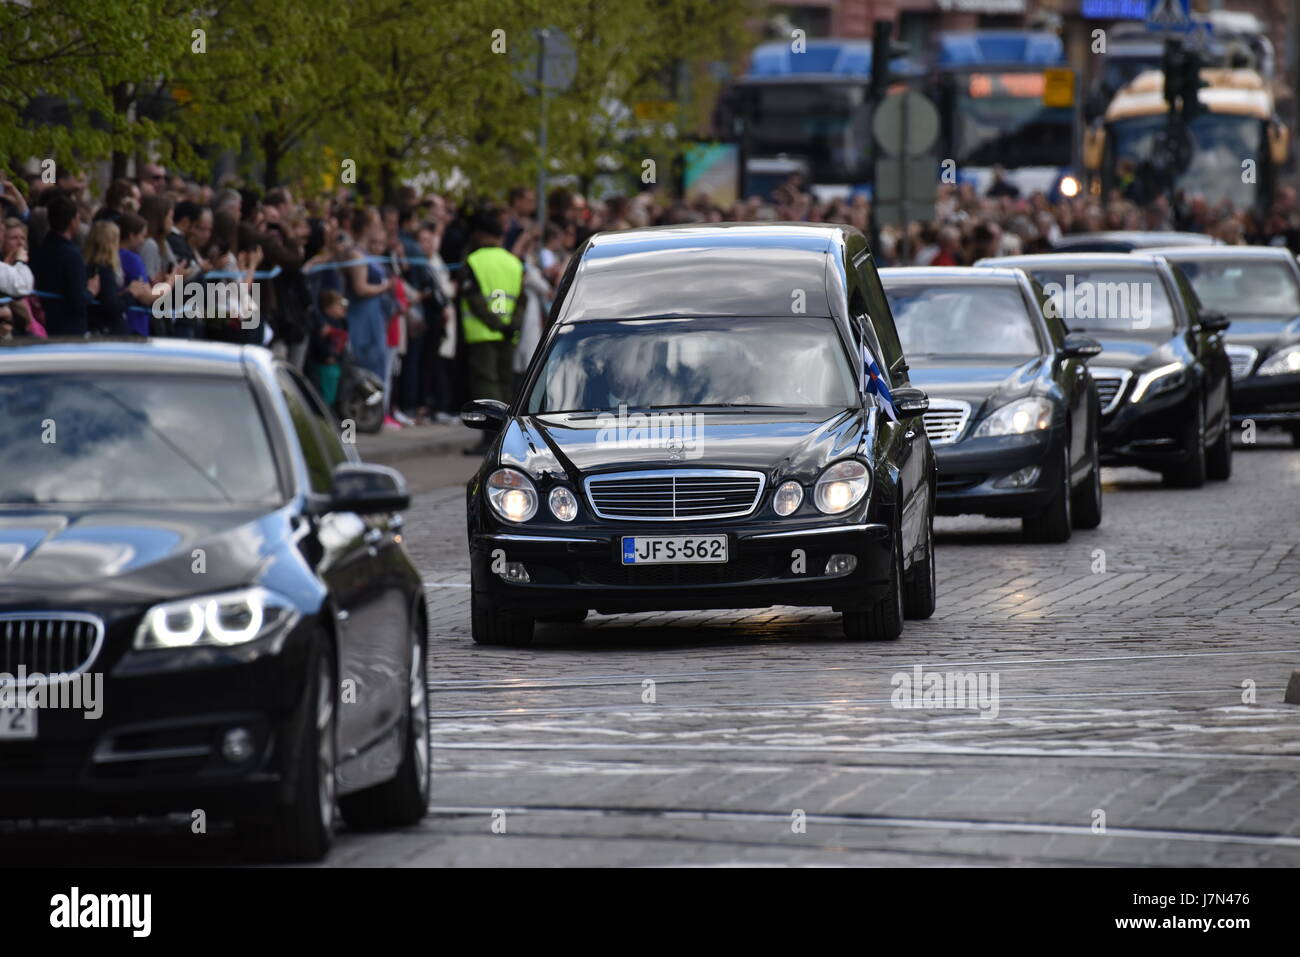 Helsinki, Finland. 25th May, 2017. The state funeral and cortege of the former President of the Republic of Finland Mauno Koivisto. Credit: Mikko Palonkorpi/Alamy Live News. Stock Photo